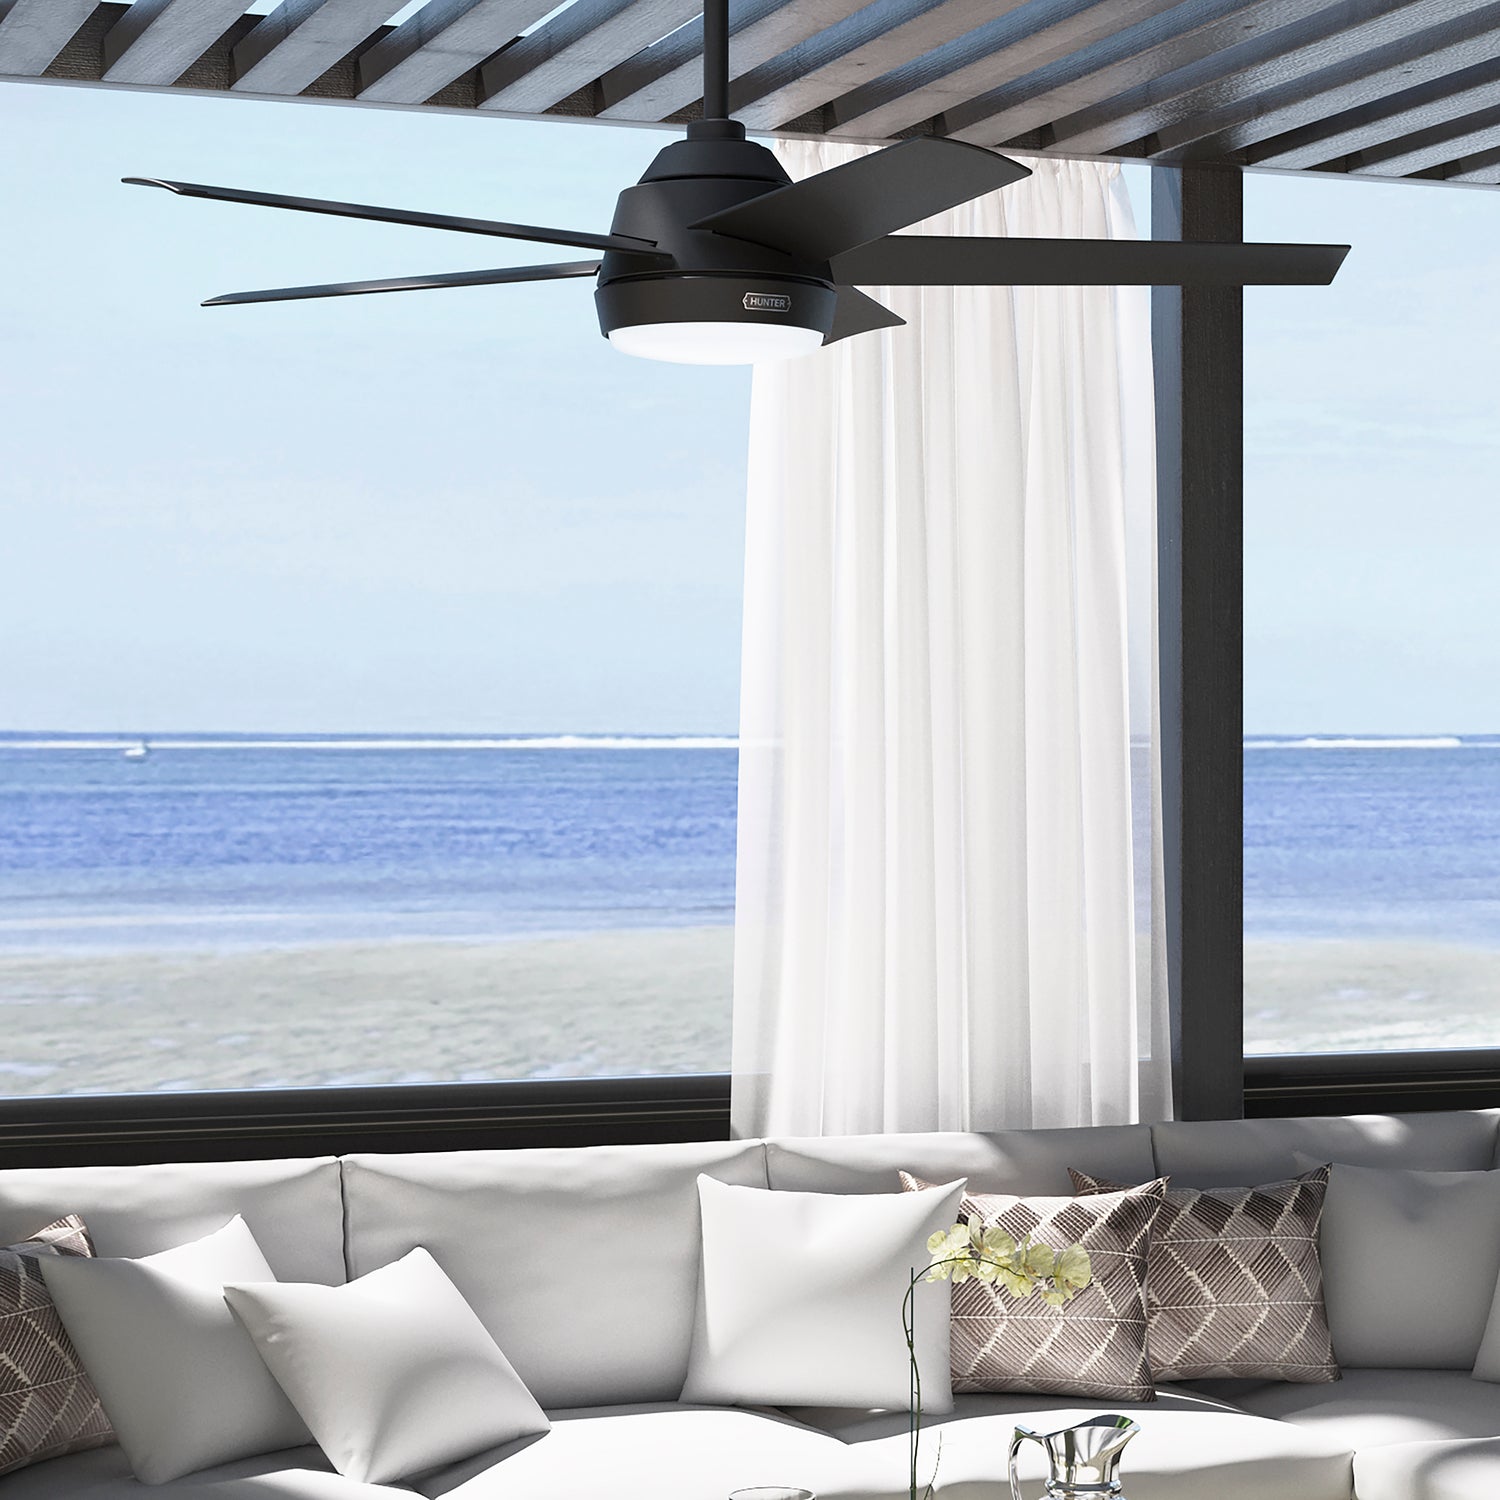 Skyflow Outdoor Ceiling fan mounted on pergola at the beach in a matte black finish.